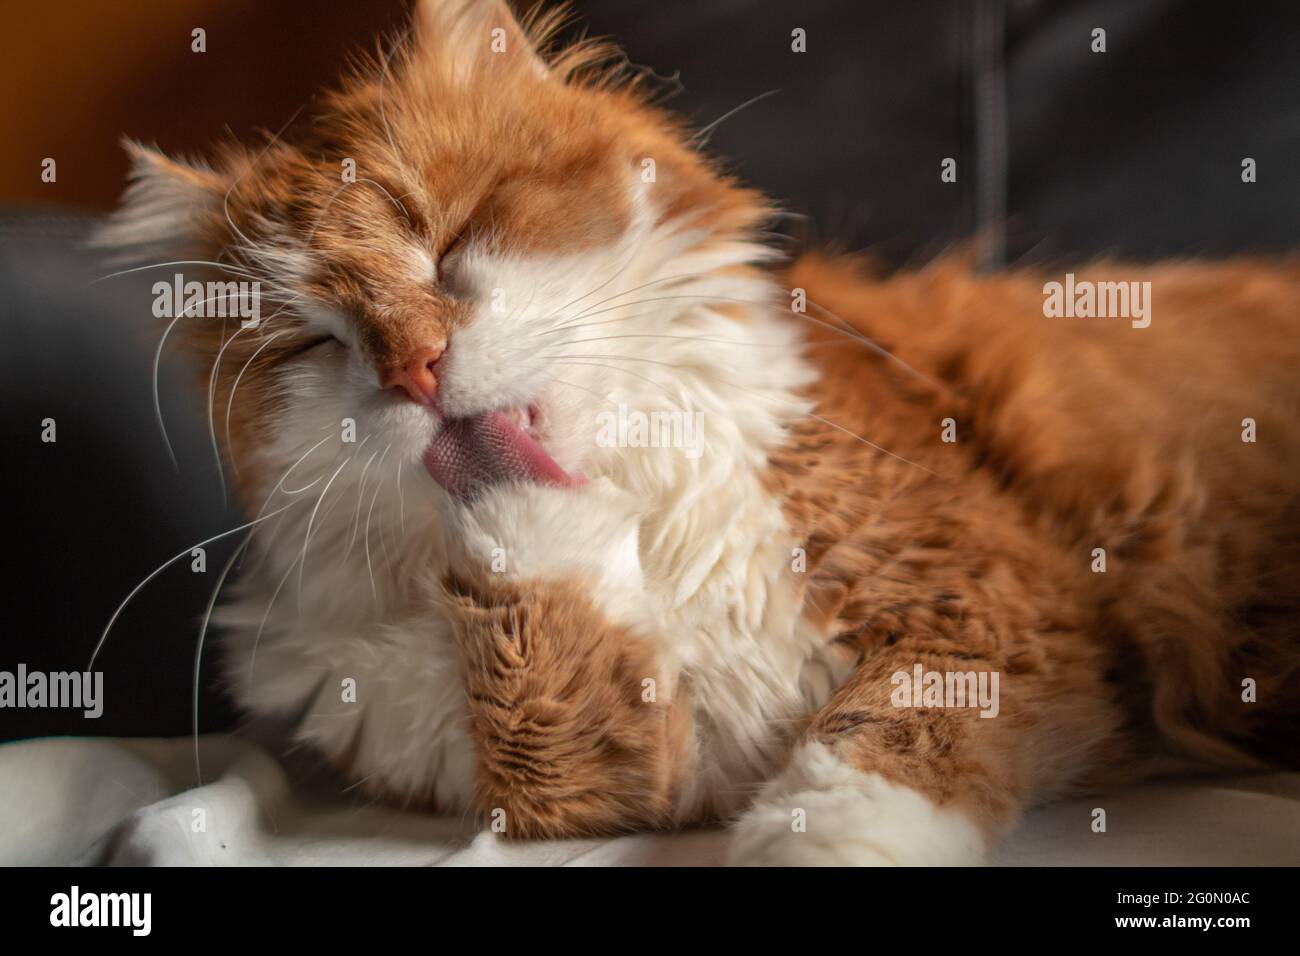 Beautiful orange furry male cat resting on a leather chair and licking its paw Stock Photo